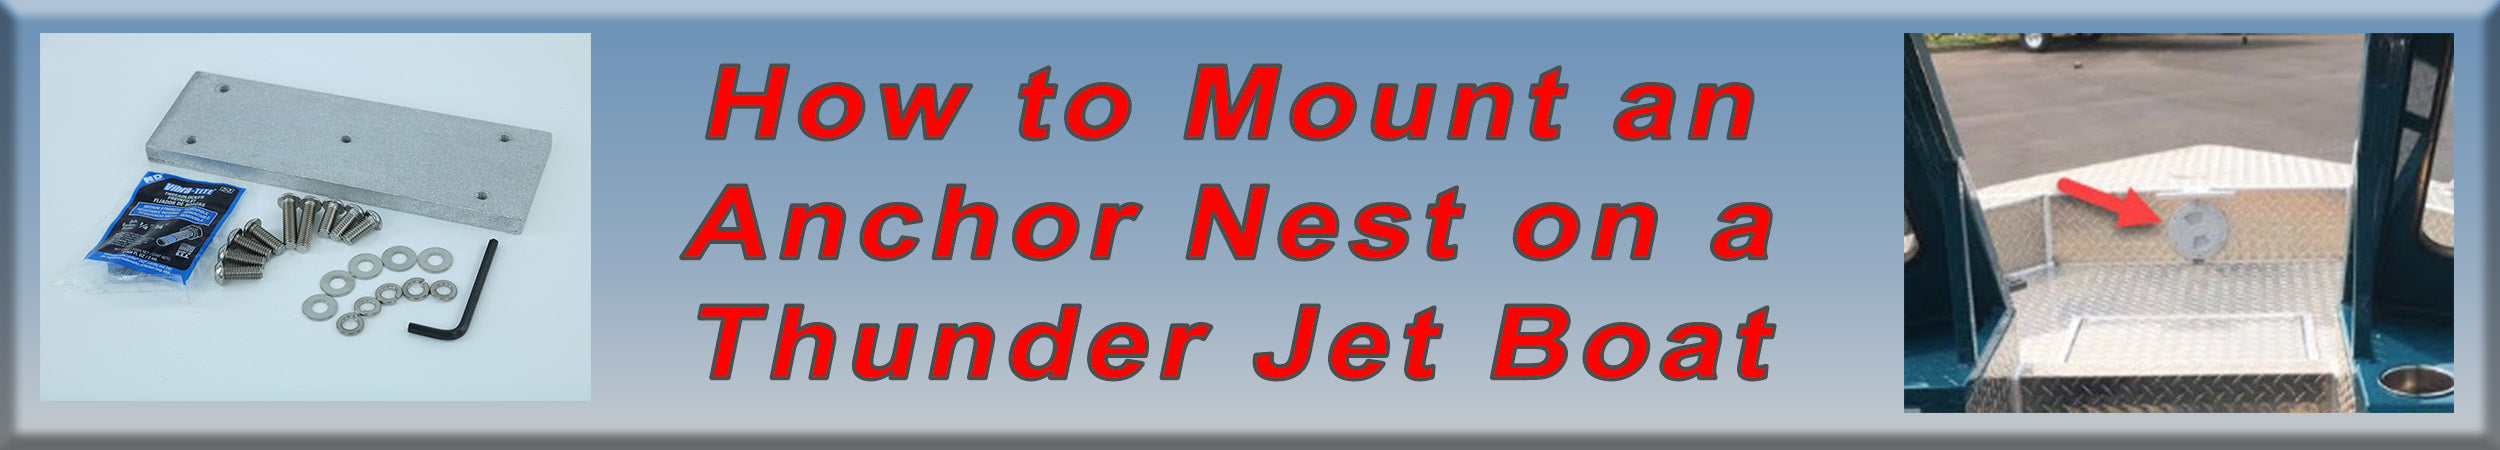 Mounting an Anchor Nest on Your Thunder Jet